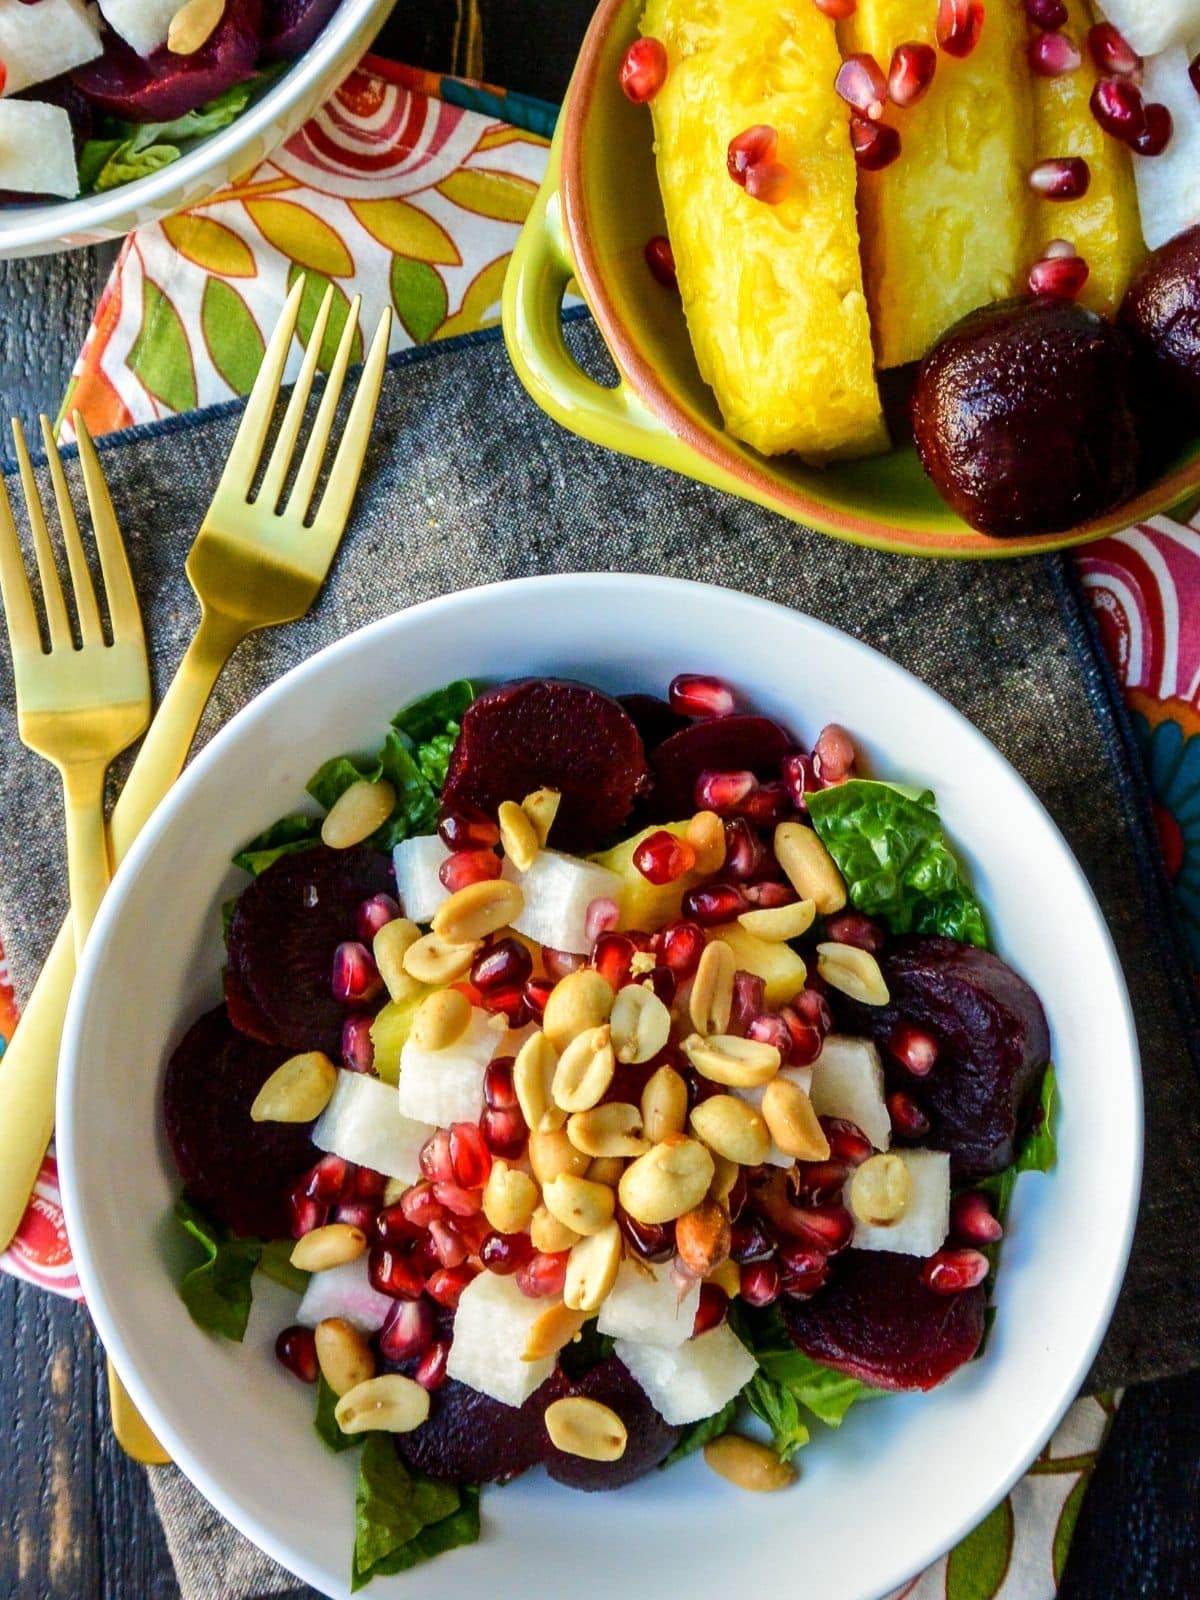 Salad next to bowl of pineapple spears, jicama, beets, and pomegranate seeds.